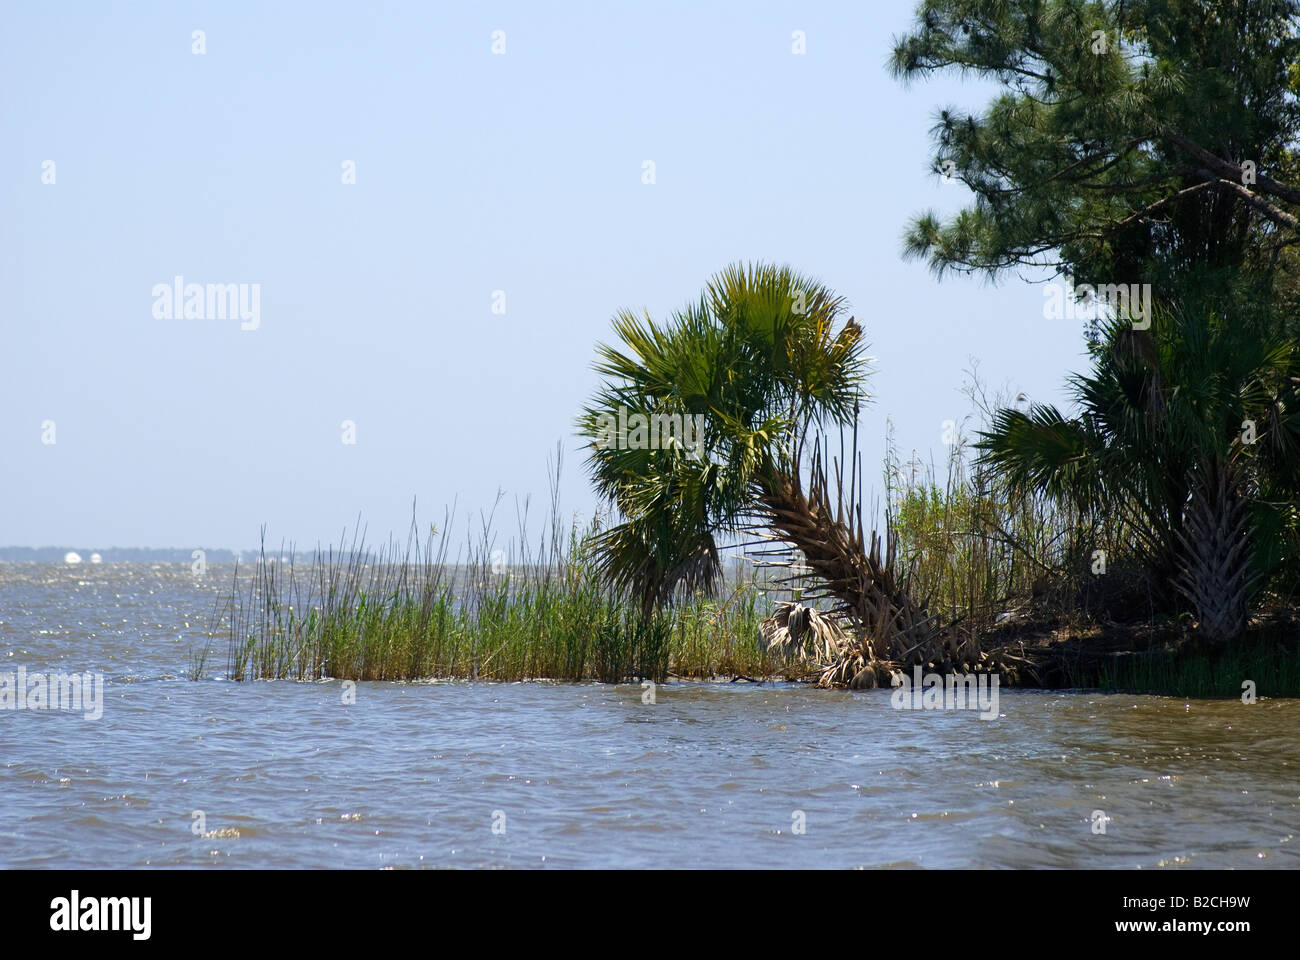 at the mouth of the Apalachicola River as it empties into Apalachicola Bay Stock Photo